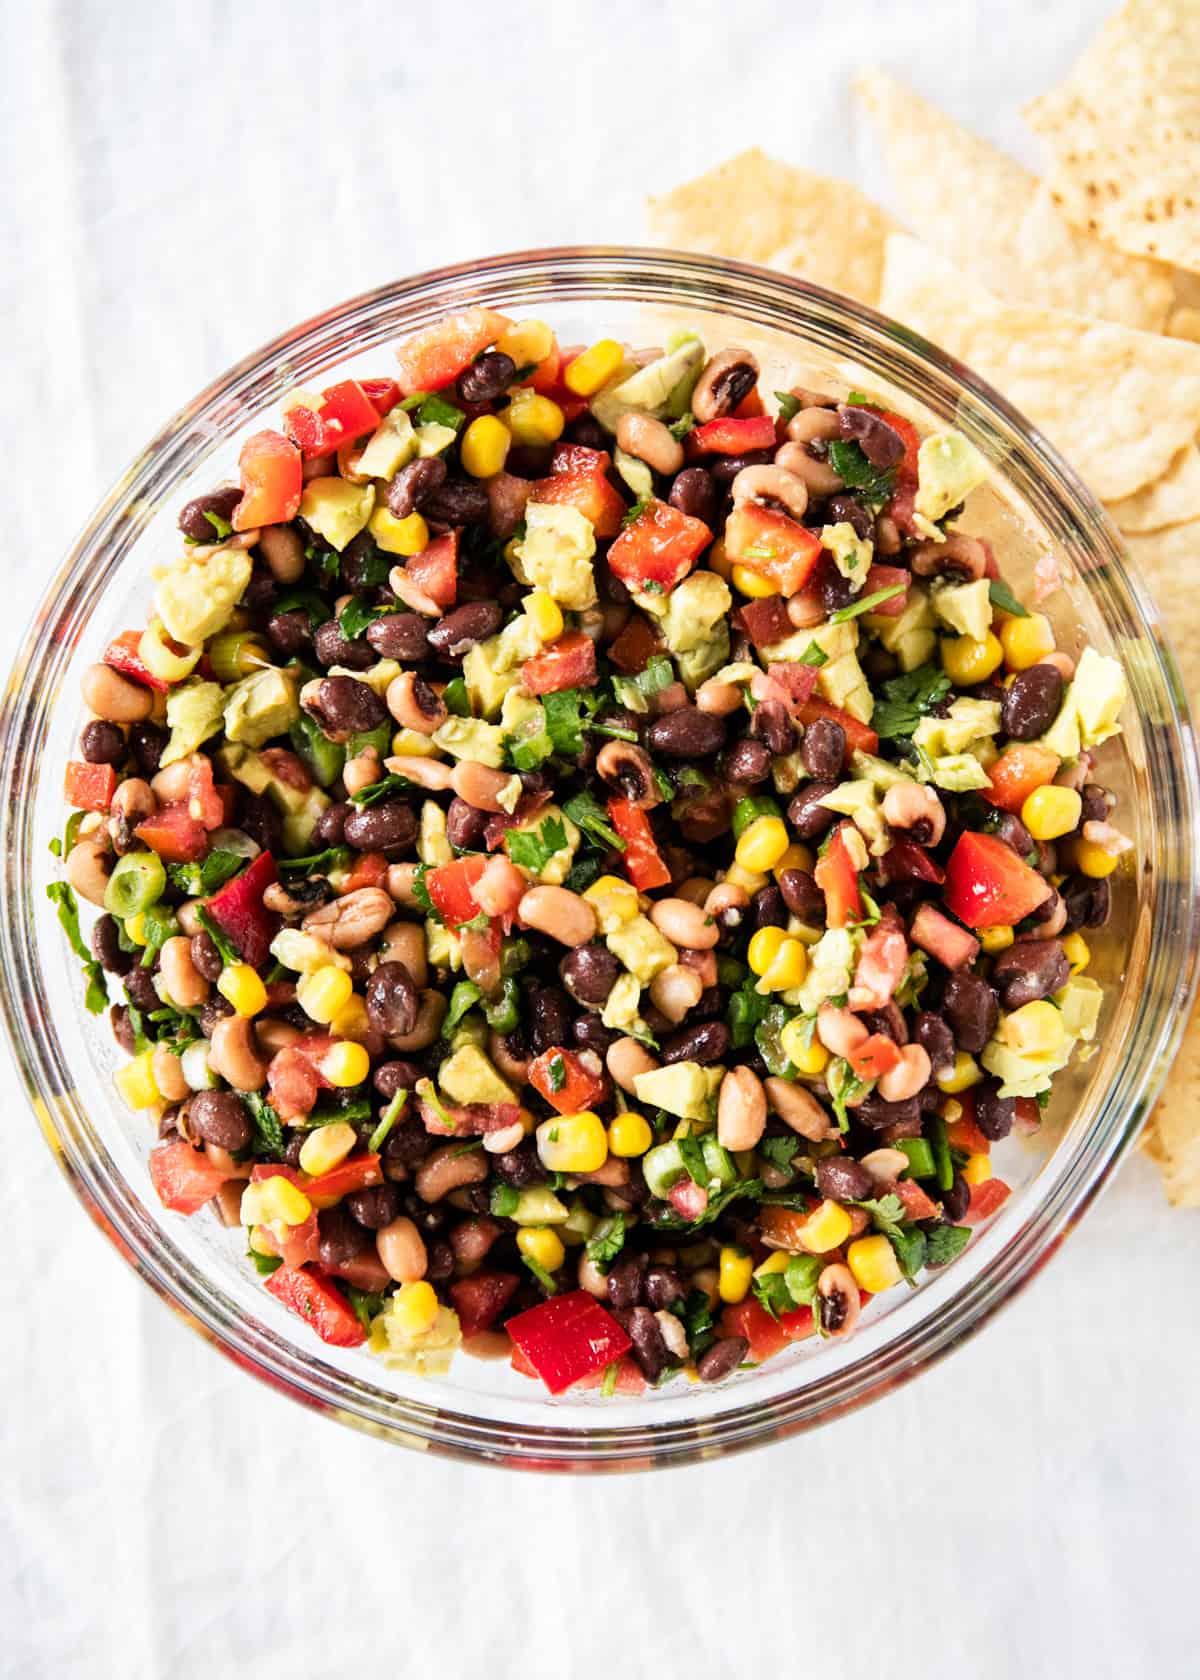 Cowboy caviar mixed together with tortilla chips on the side. 